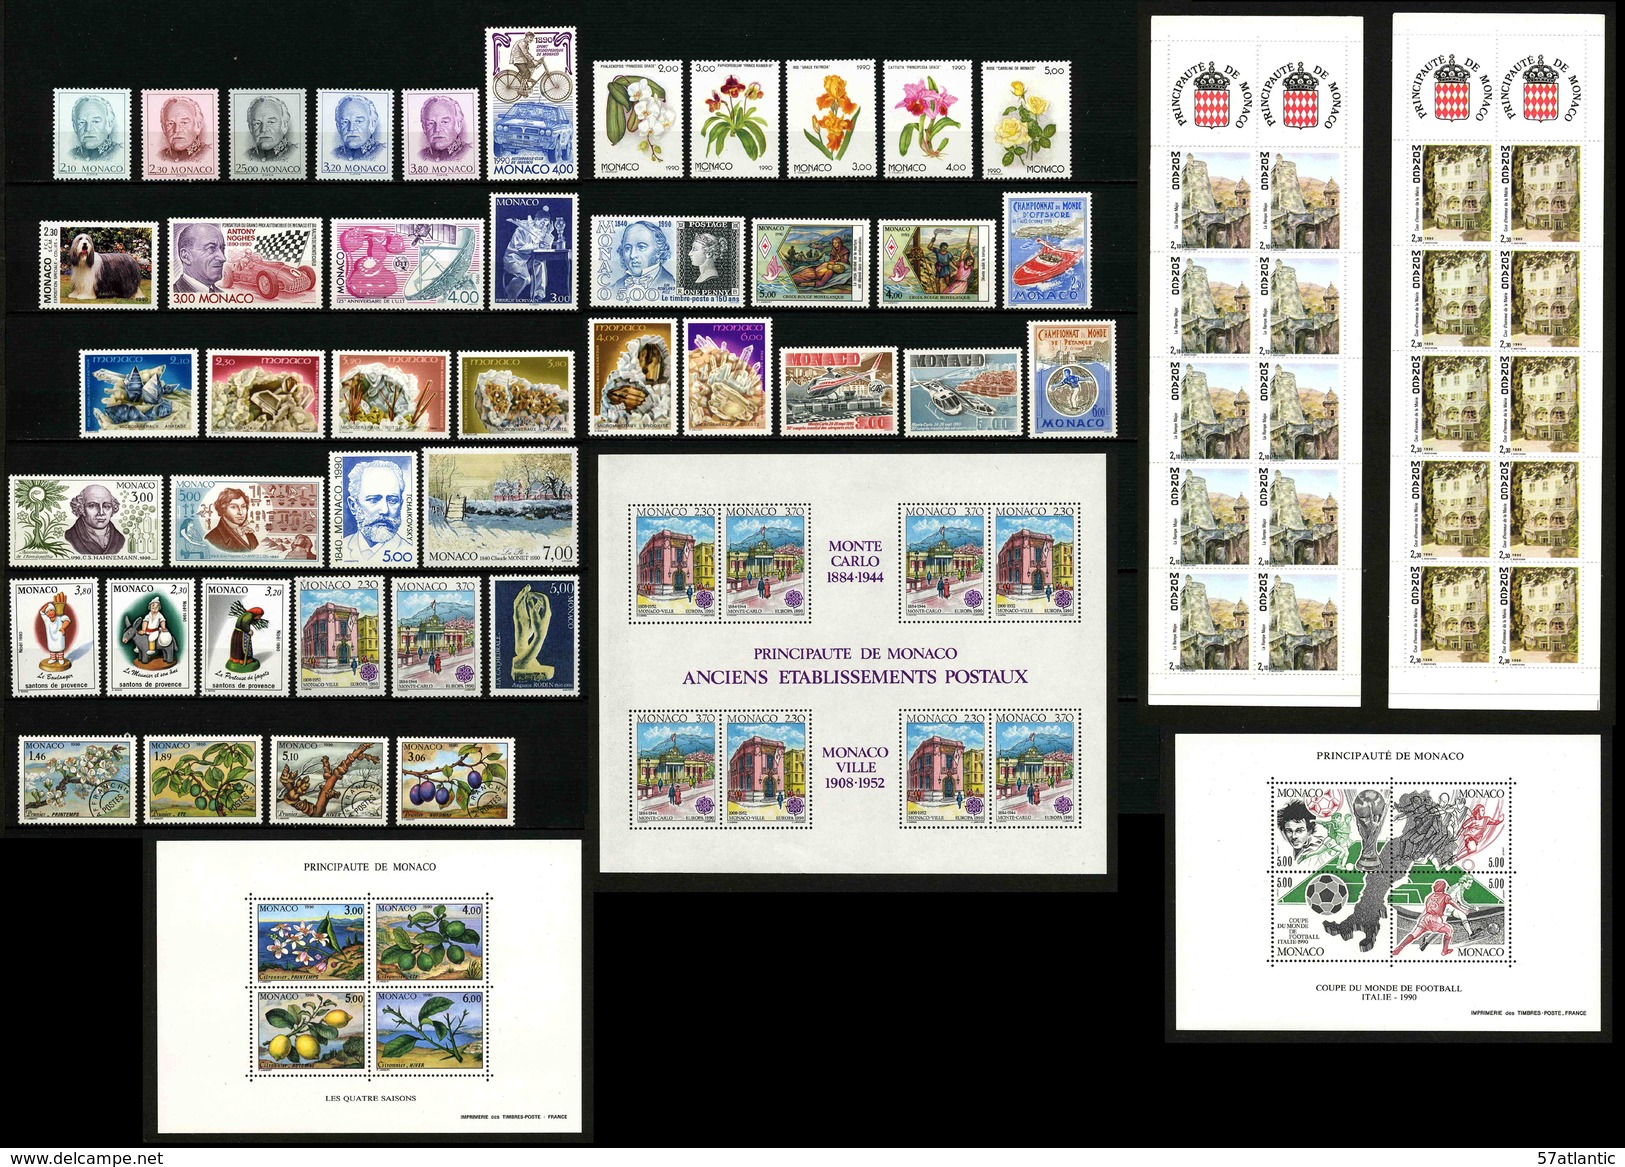 MONACO - ANNEE COMPLETE 1990 - AVEC PREOS, BLOCS, CARNETS -  42 TIMBRES NEUFS ** + 3 BLOCS NEUFS ** + 2 CARNETS ** - Full Years